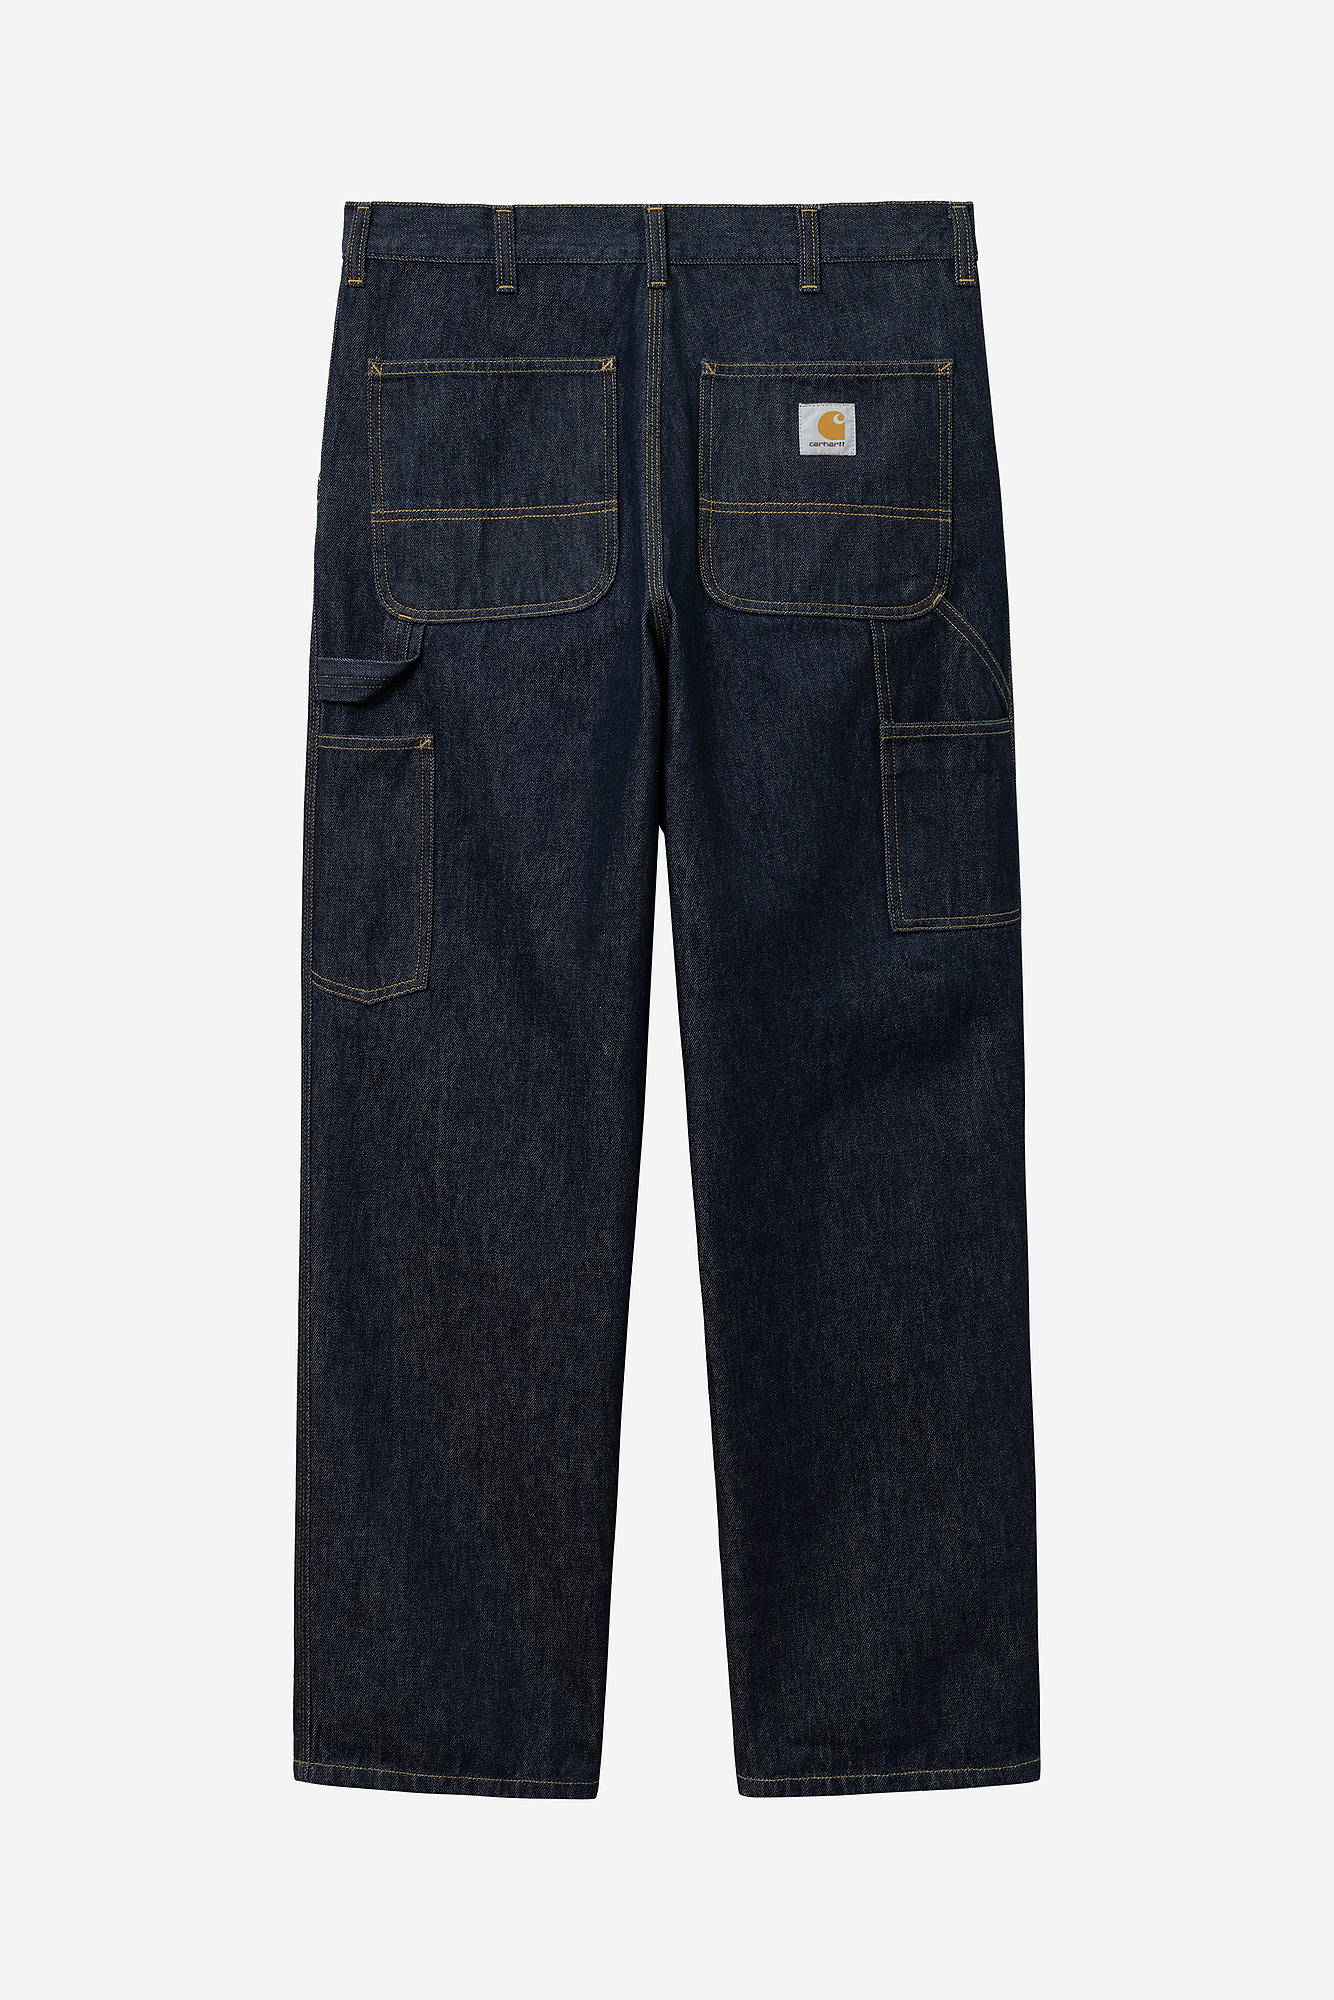 Carhartt WIP Single Knee Pant 100% Cotton rinsed and heavy stone bleached Smith Denim